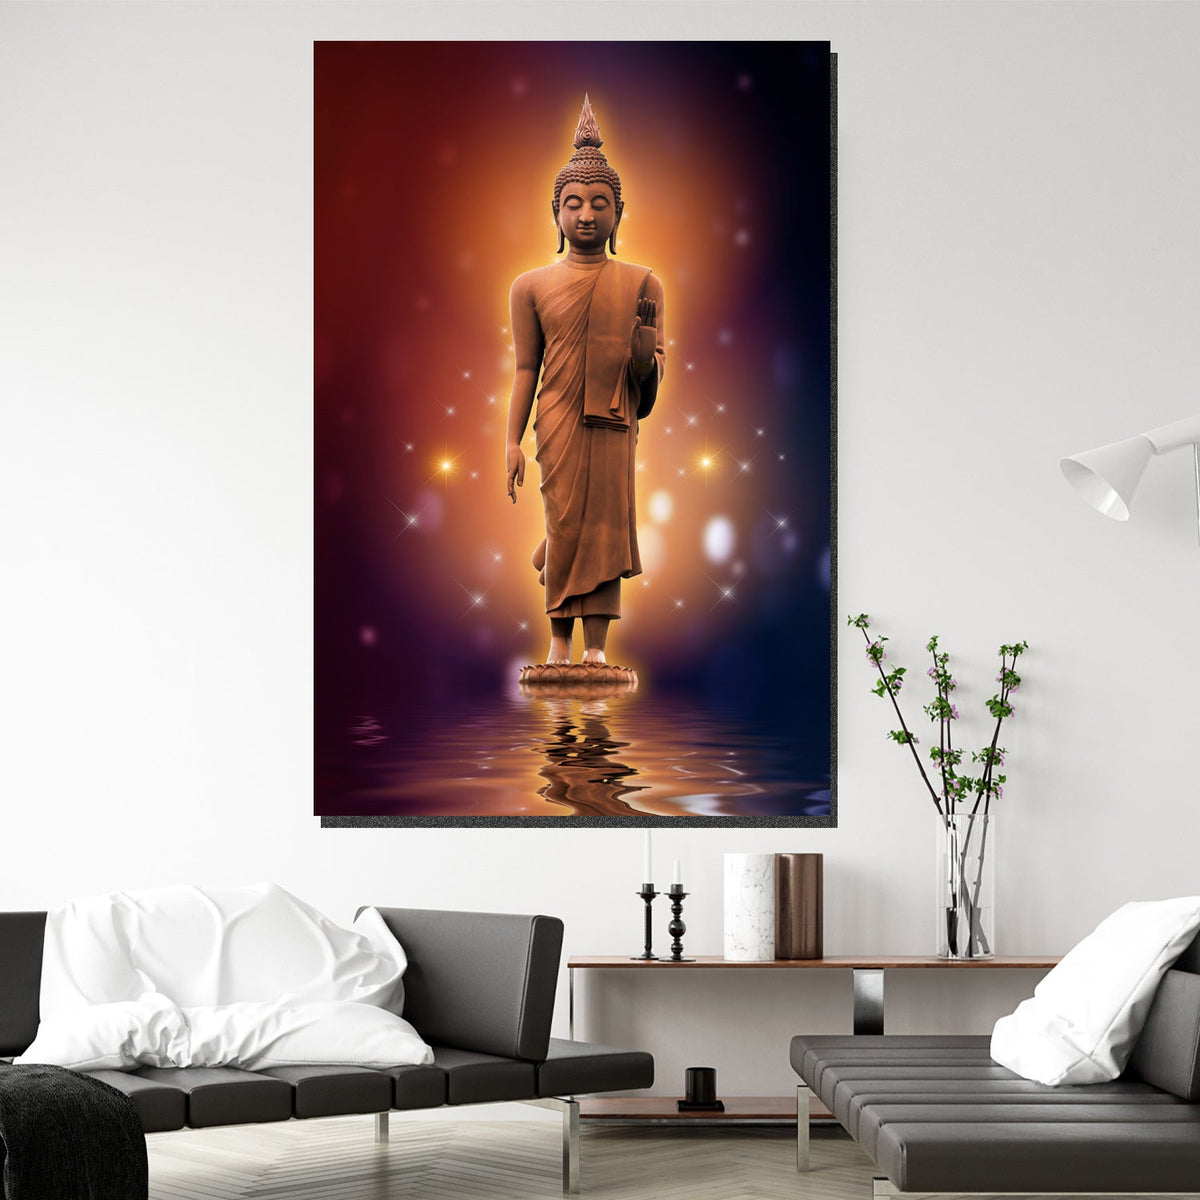 https://cdn.shopify.com/s/files/1/0387/9986/8044/products/BuddhaonWaterCanvasArtprintStretched-1.jpg